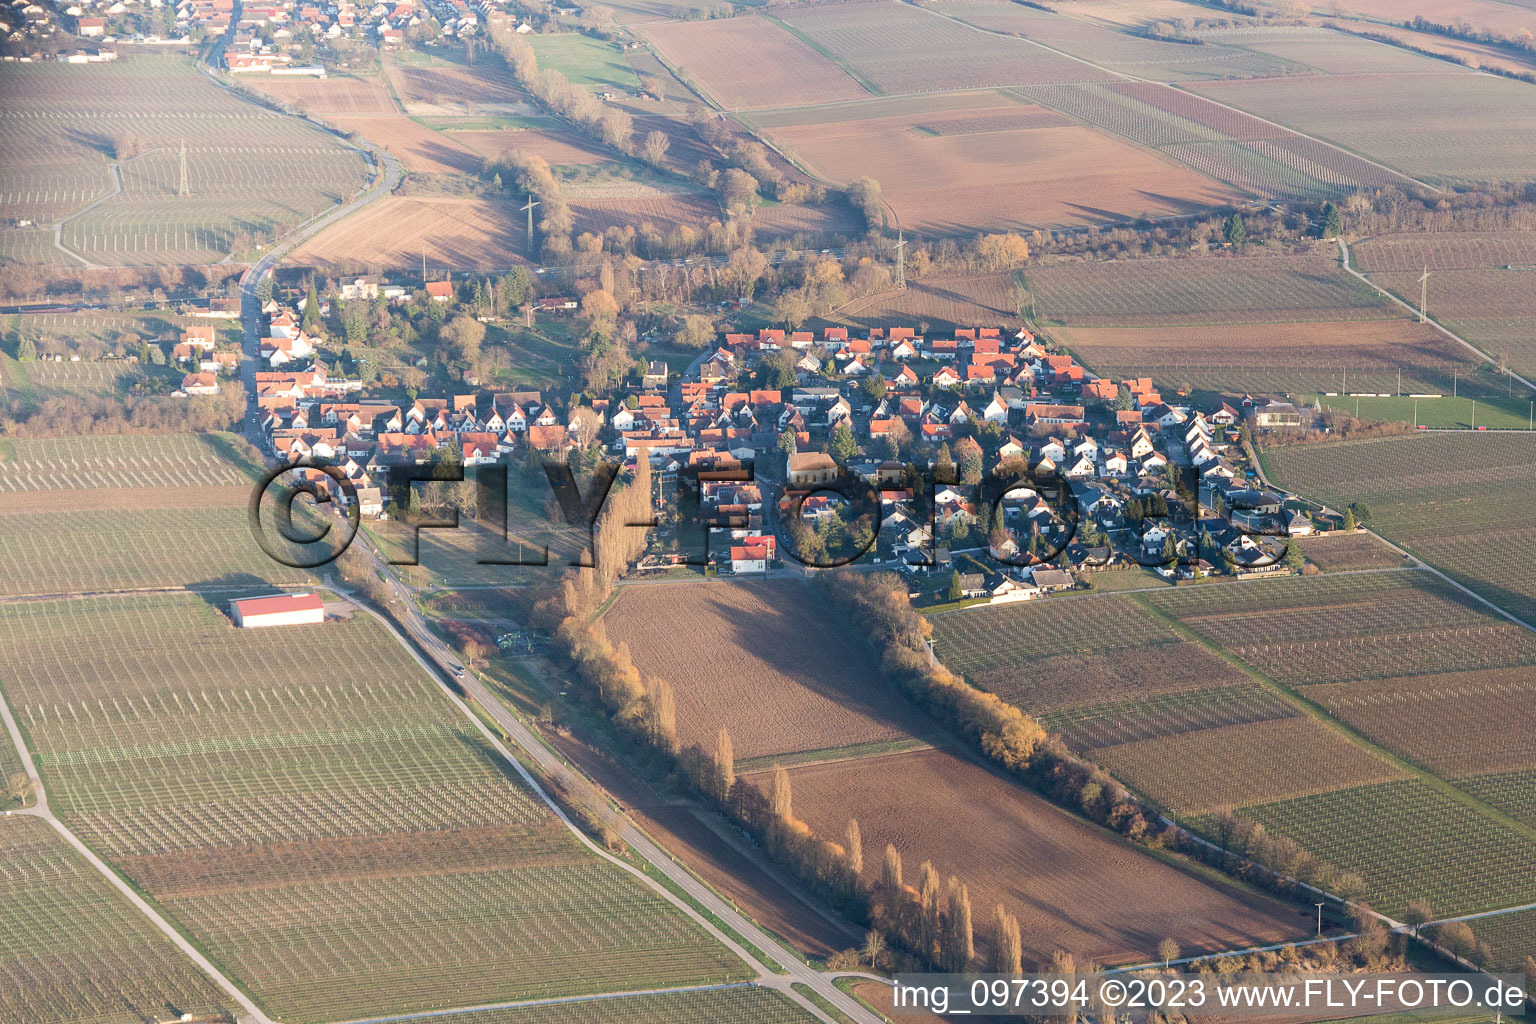 Oblique view of Walsheim in the state Rhineland-Palatinate, Germany